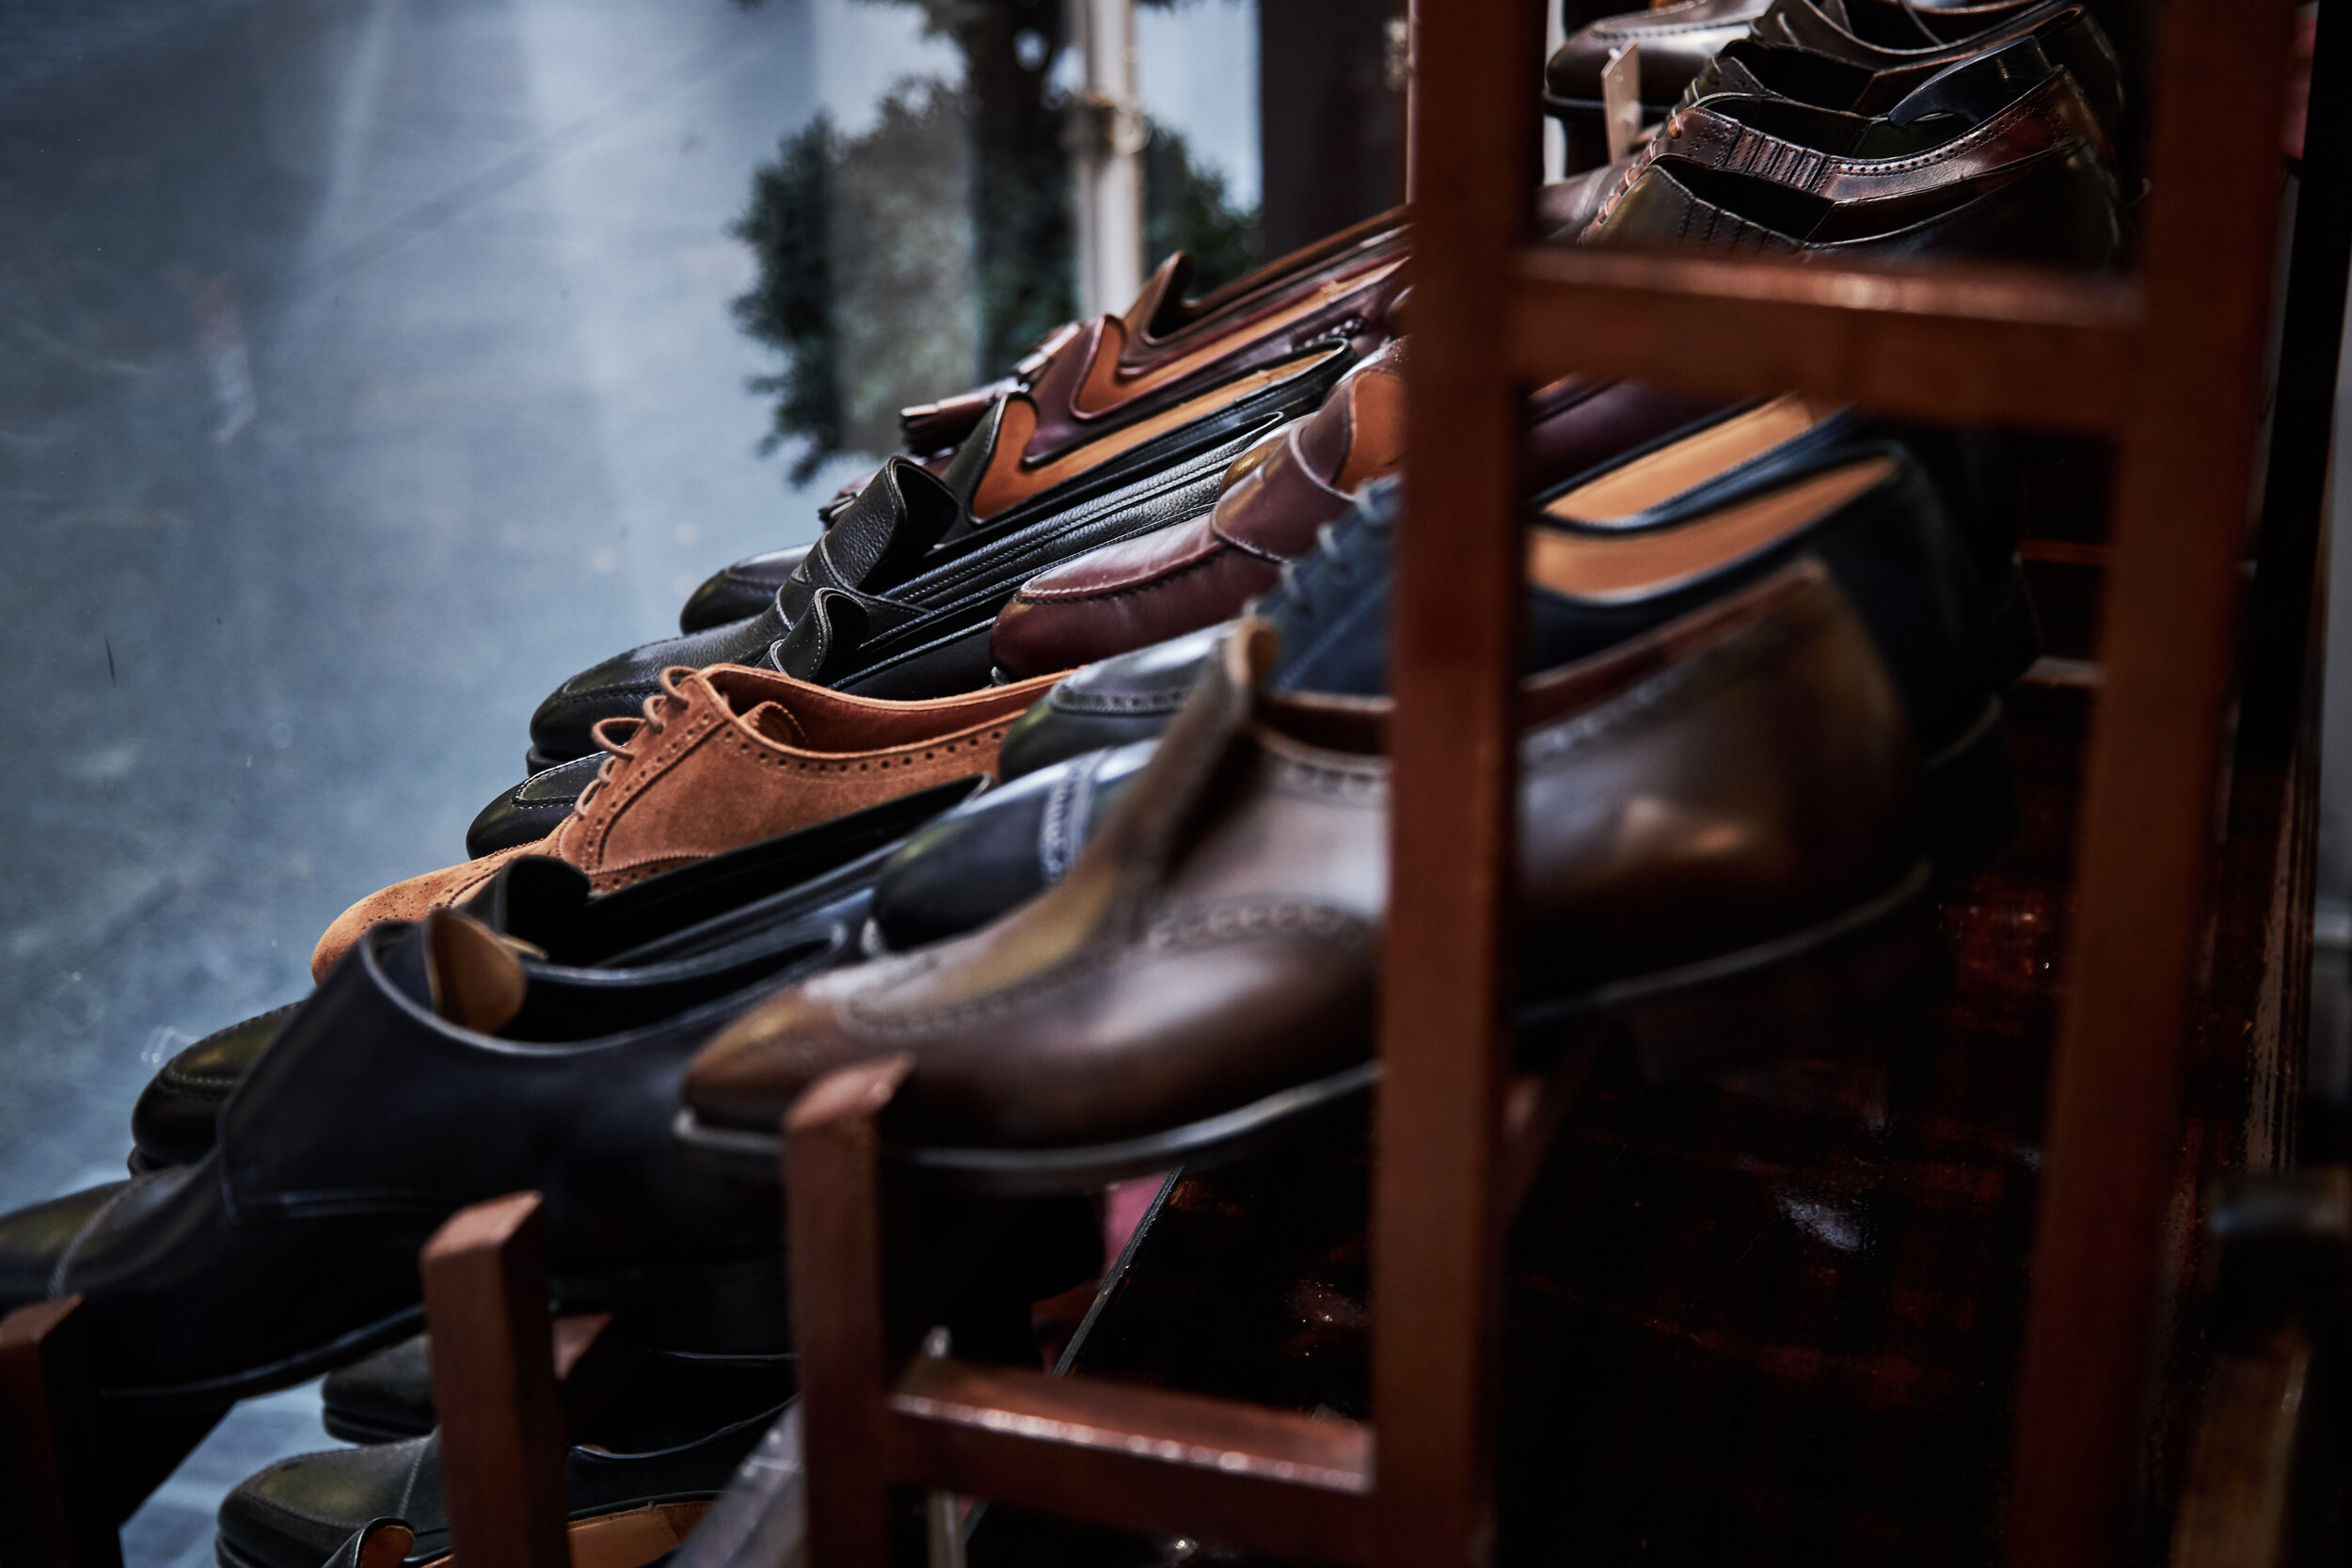 Shoe Repair & Maintenance: How to Take Care of Your Shoes